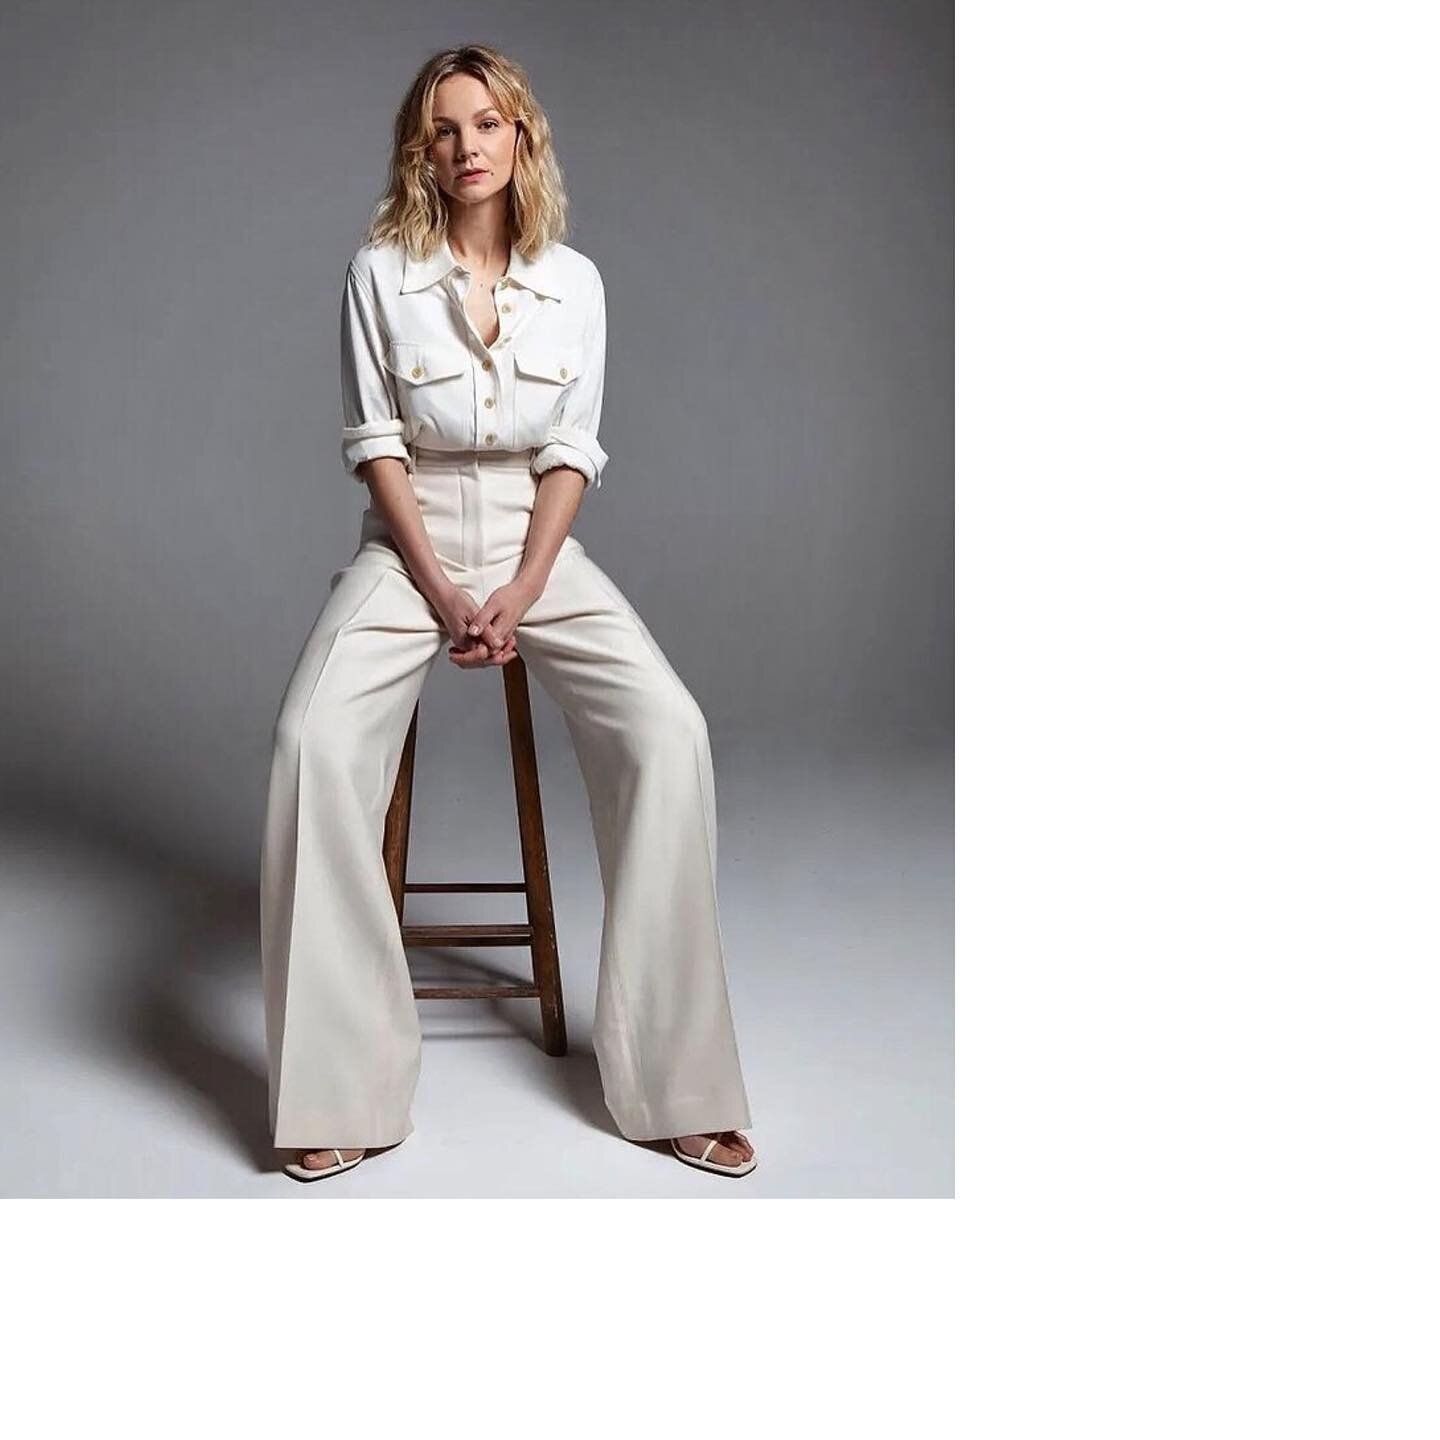 🤍 Carey Mulligan in @gabrielahearst and @josephfashion for @deadline Styled by @nicky_yates assisted by me 🤍#promisingyoungwoman